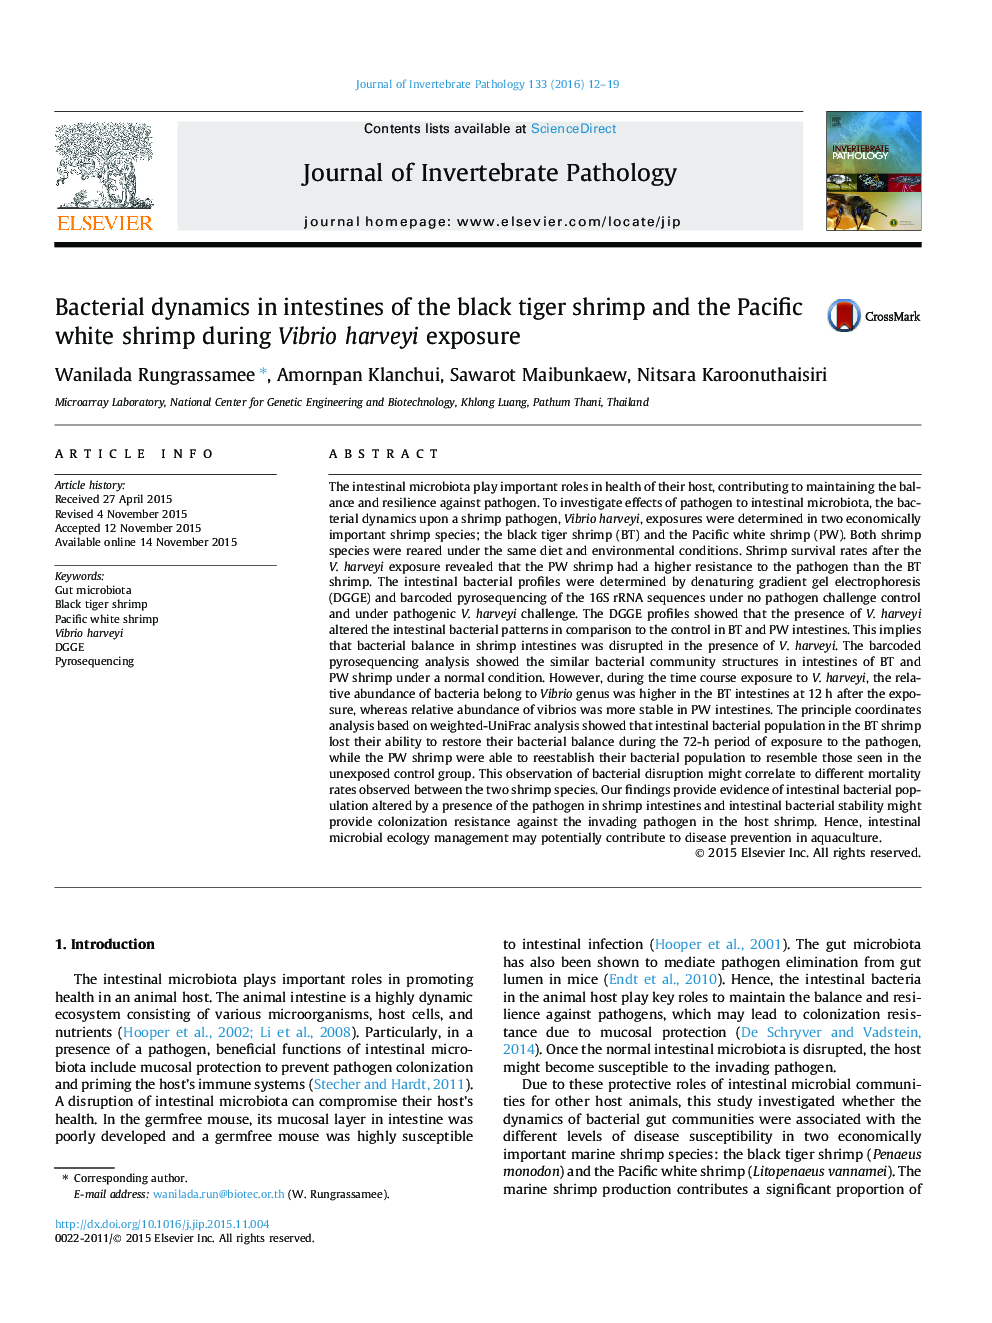 Bacterial dynamics in intestines of the black tiger shrimp and the Pacific white shrimp during Vibrio harveyi exposure